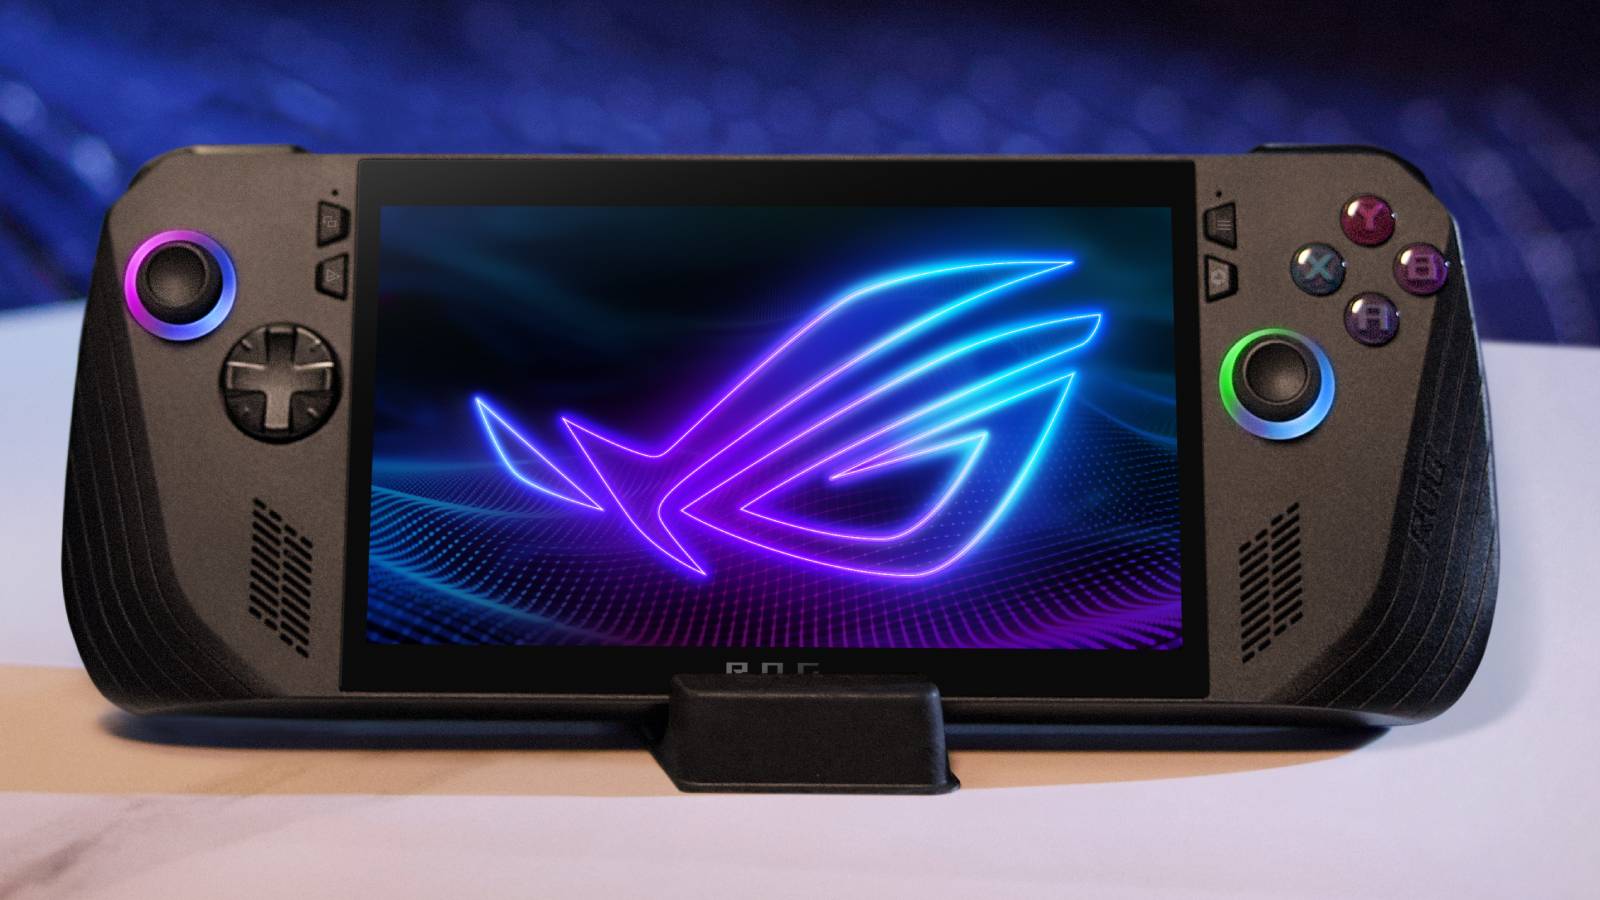 Promotional image for the ROG Ally X handheld.